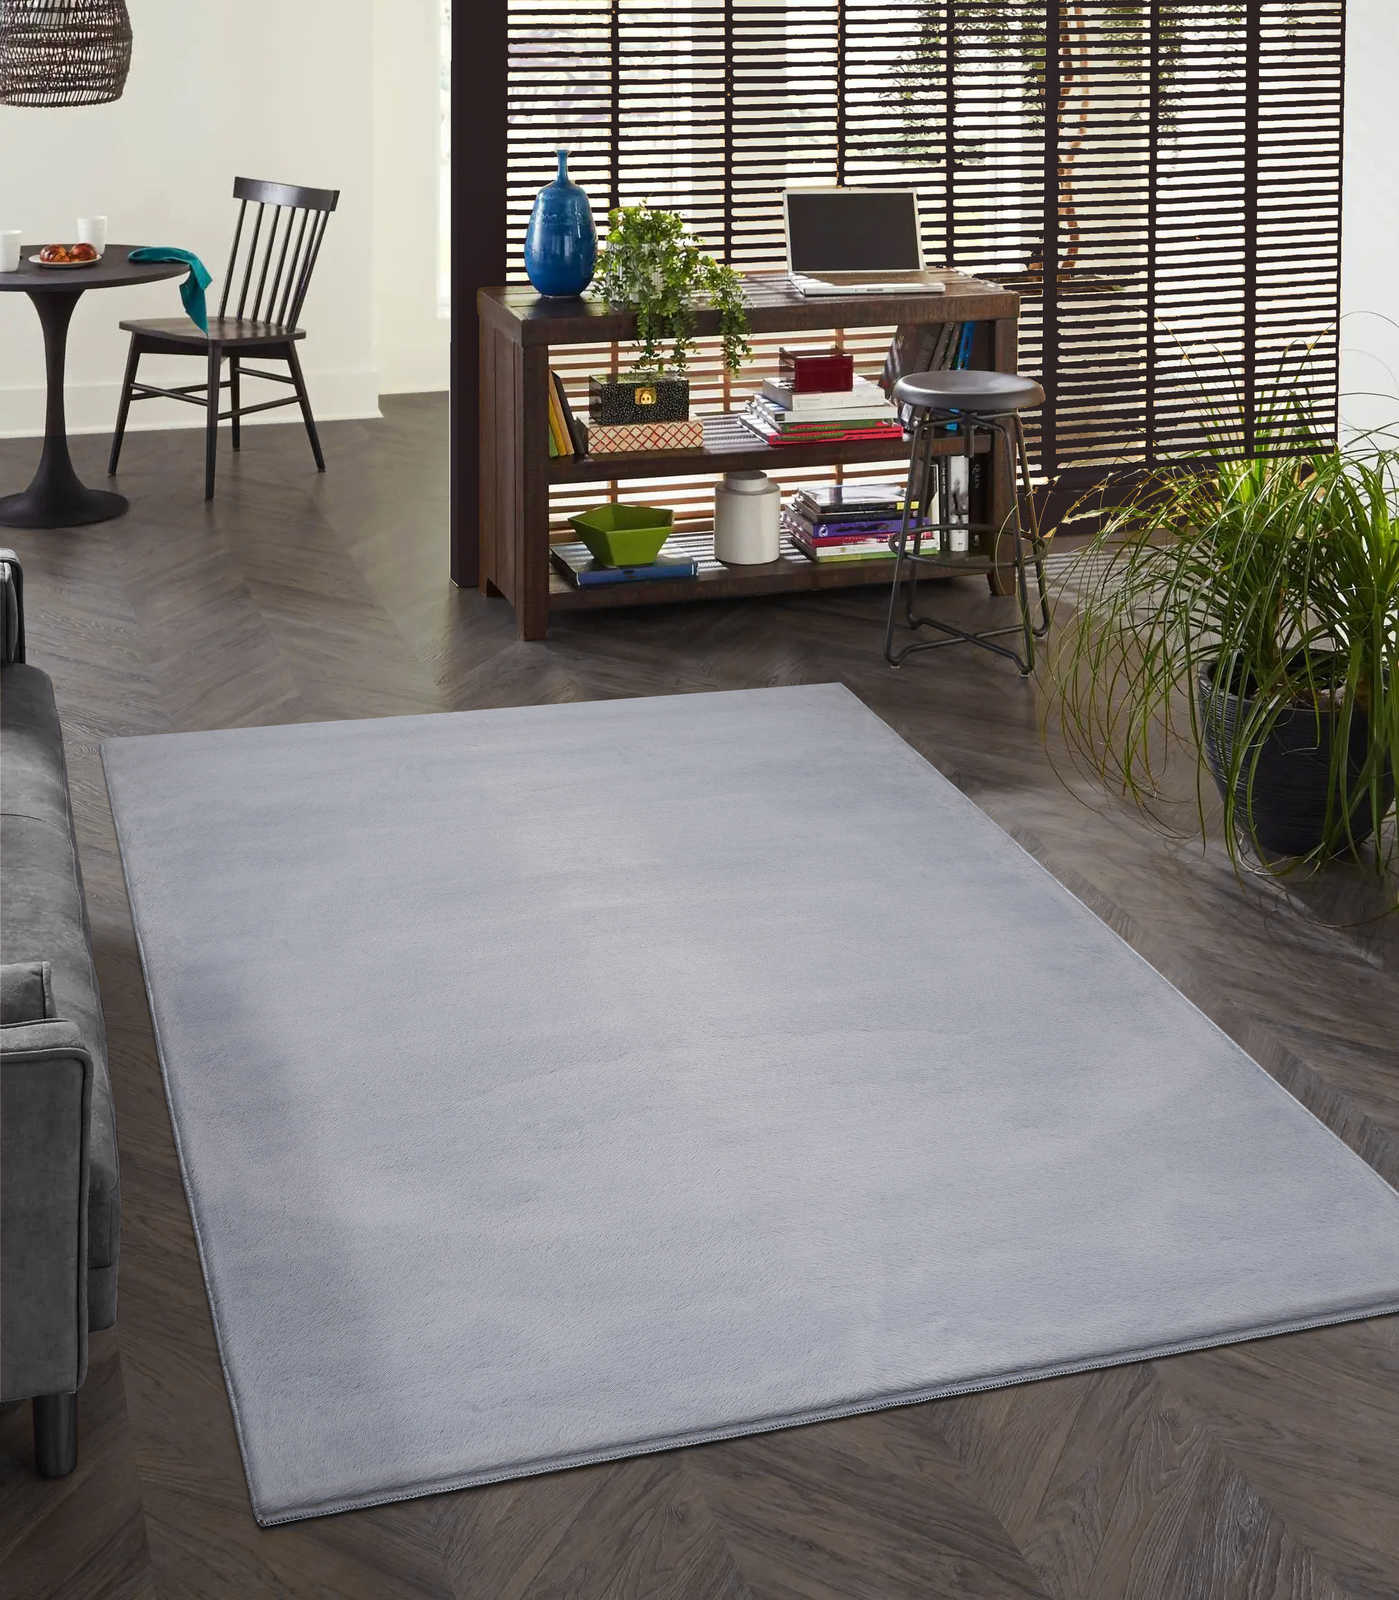 Comfortable high pile carpet in soft grey - 100 x 50 cm
